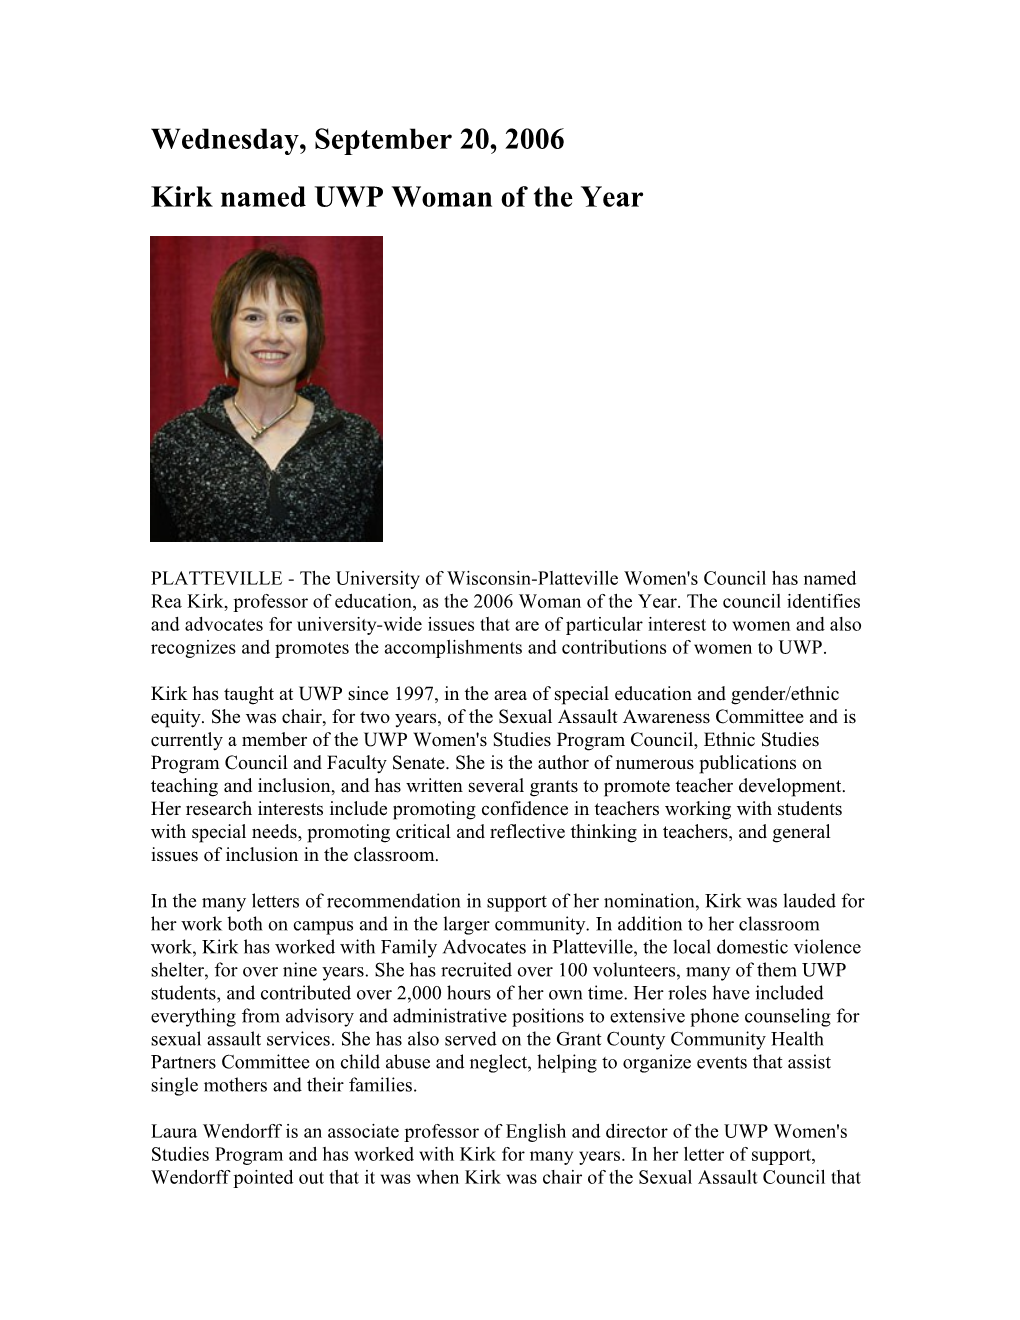 Kirk Named UWP Woman of the Year